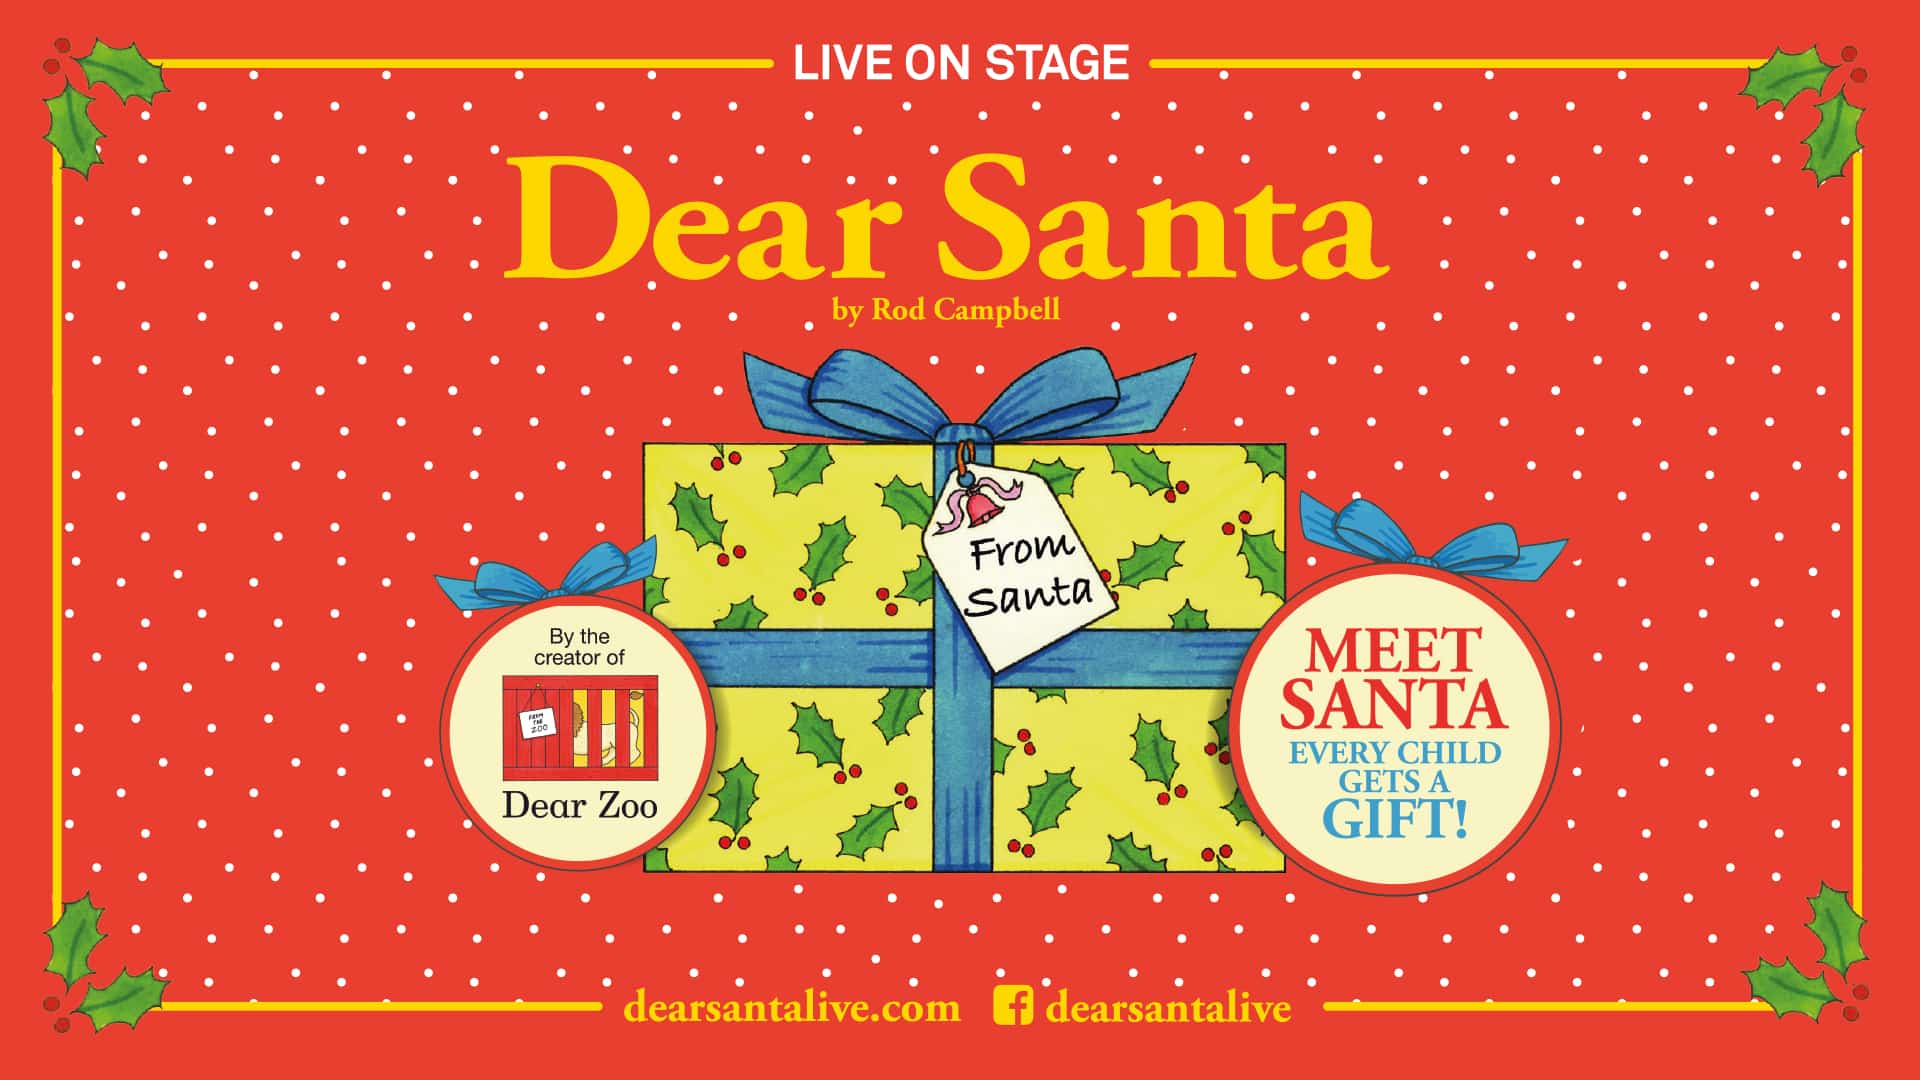 Dear Santa promotional image - An illustration of a gift-wrapped Christmas present with a gift tag that reads: 'From Santa'. Either side of the present are circles with blue bows sticking out the top. The one on the left contains text reading 'From the creator of Dear Zoo' and an illustration of the Dear Zoo cover art. In the second circle, text reads: 'Meet Santa; Every child gets a free gift!' Main text at the top of the picture reads: 'Live on stage; Dear Santa; by Rod Campbell'. The background is red with white dots and there is a golden border on each side with winter holly leaves in each corner.